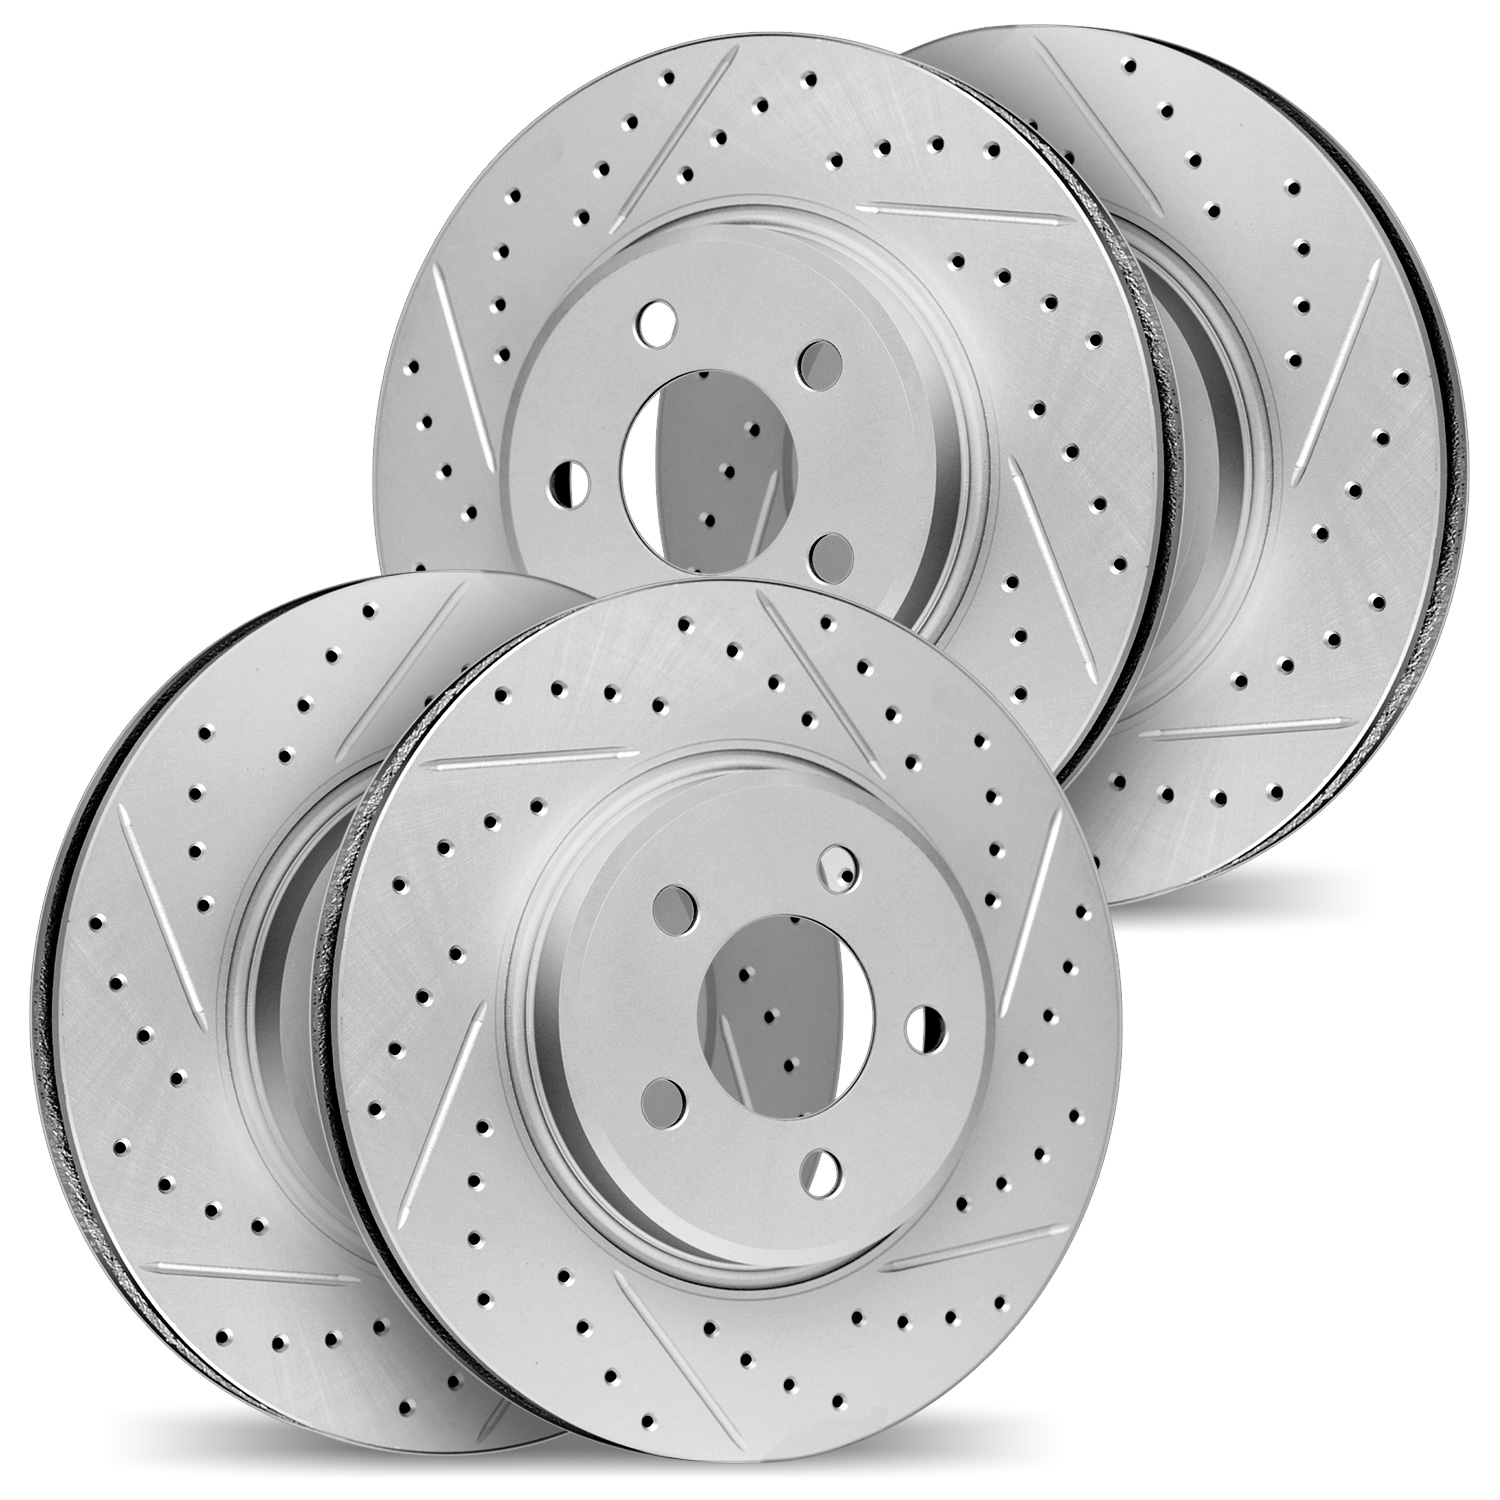 2004-26003 Geoperformance Drilled/Slotted Brake Rotors, Fits Select Tesla, Position: Front and Rear